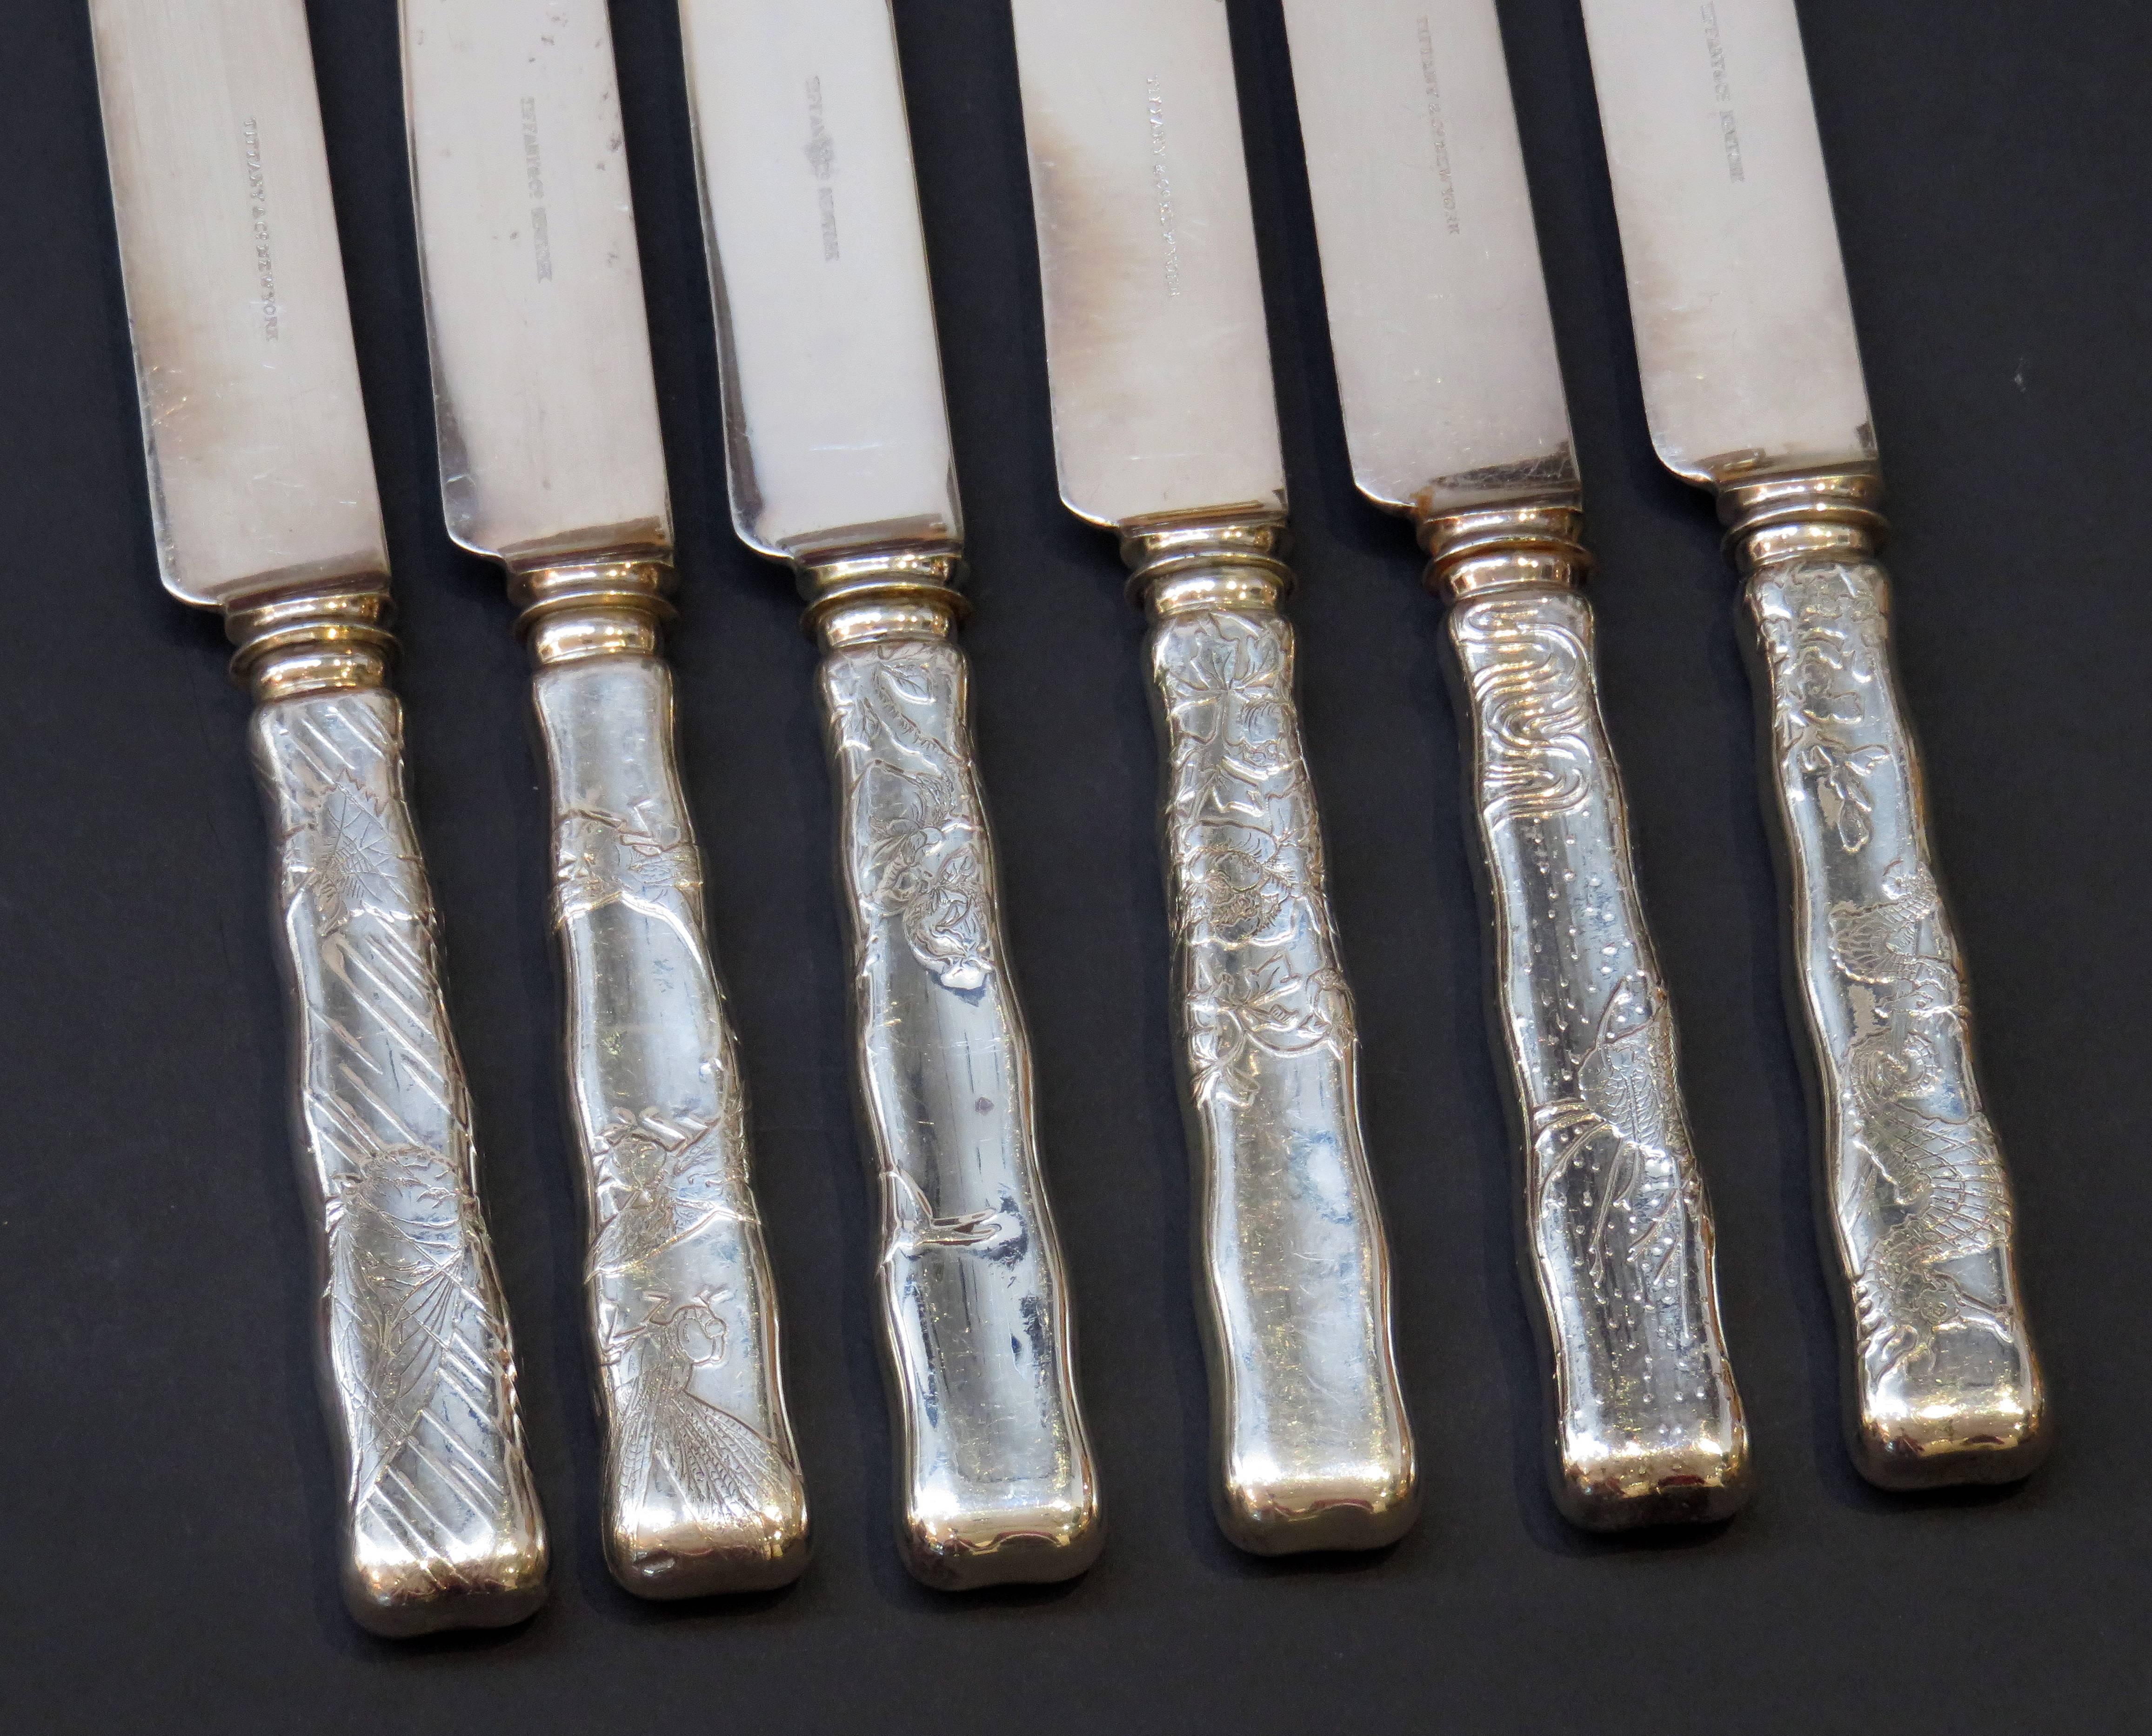 Japonisme Tiffany & Company Lap over Edge Acid Etched Dinner Knives, circa 1880 For Sale